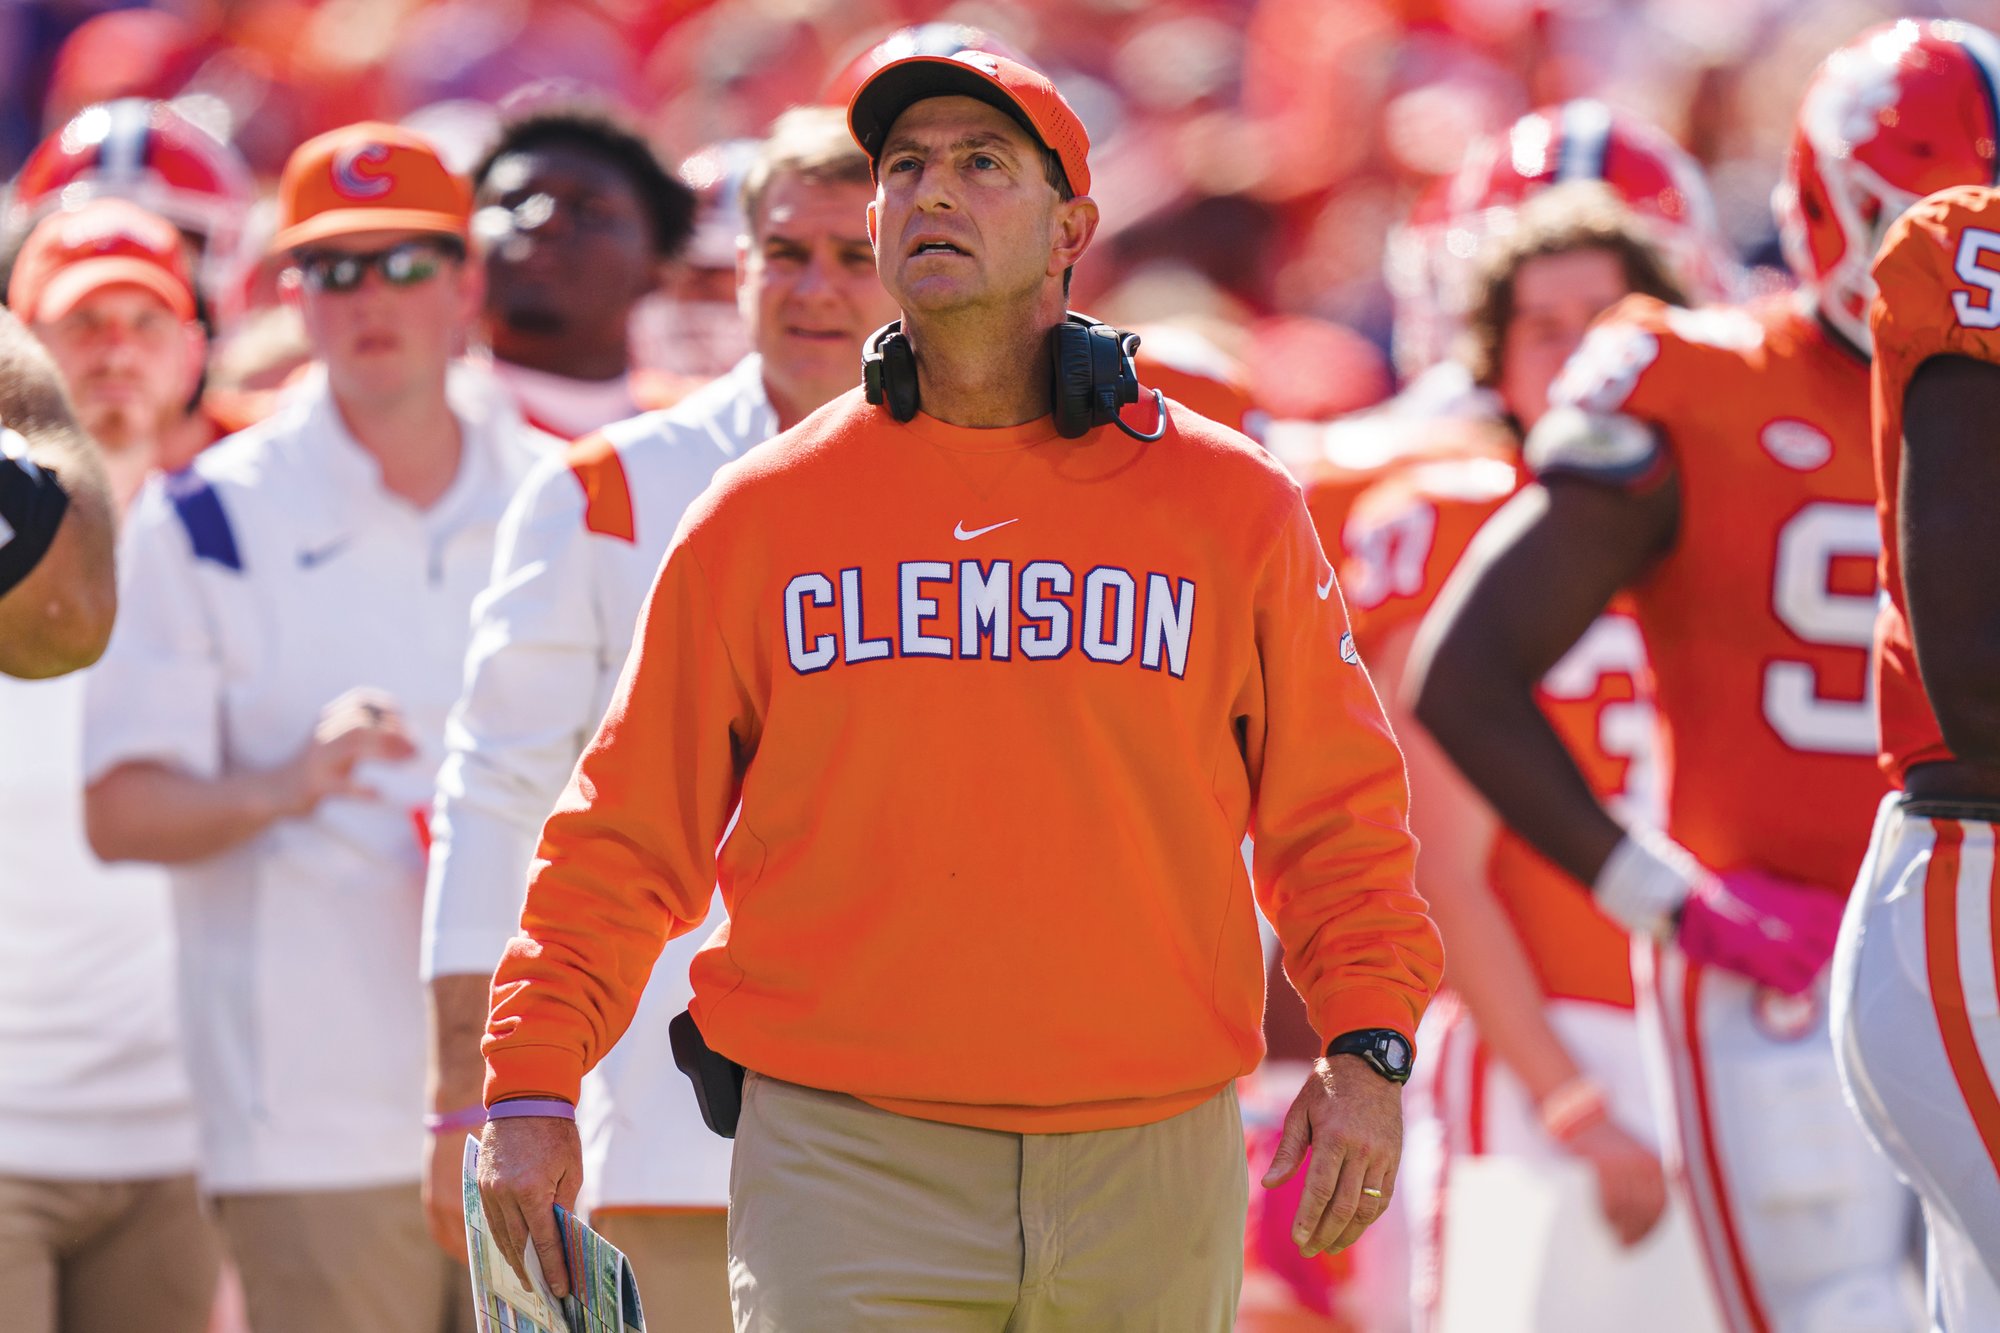 Clemson head coach Dabo Swinney looks on in the second half during an NCAA college football game against Syracuse on Saturday, Oct. 22, 2022, in Clemson, S.C.